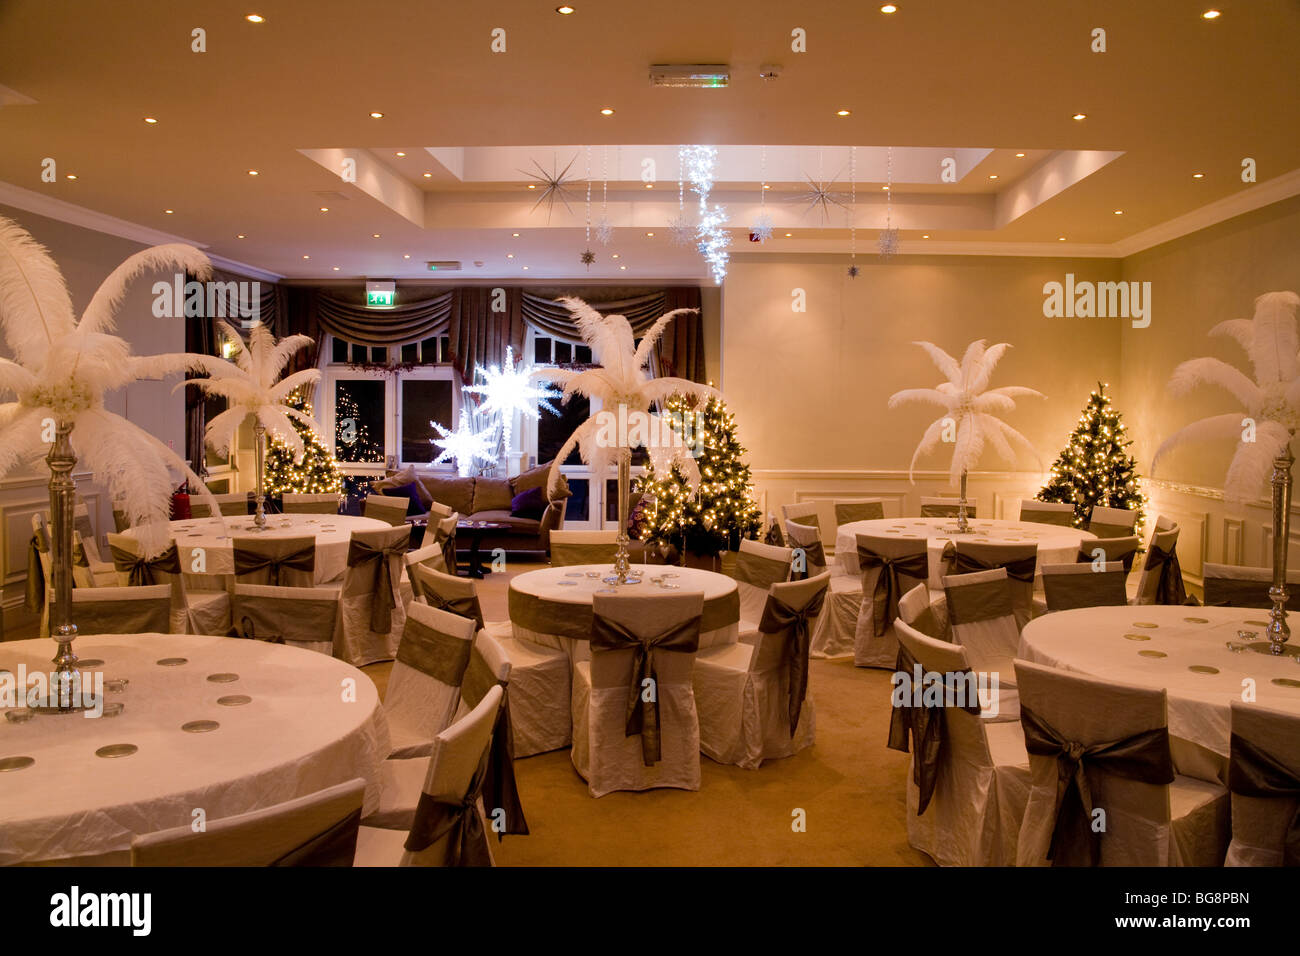 Interior of a room prepared for a wedding reception. Stock Photo